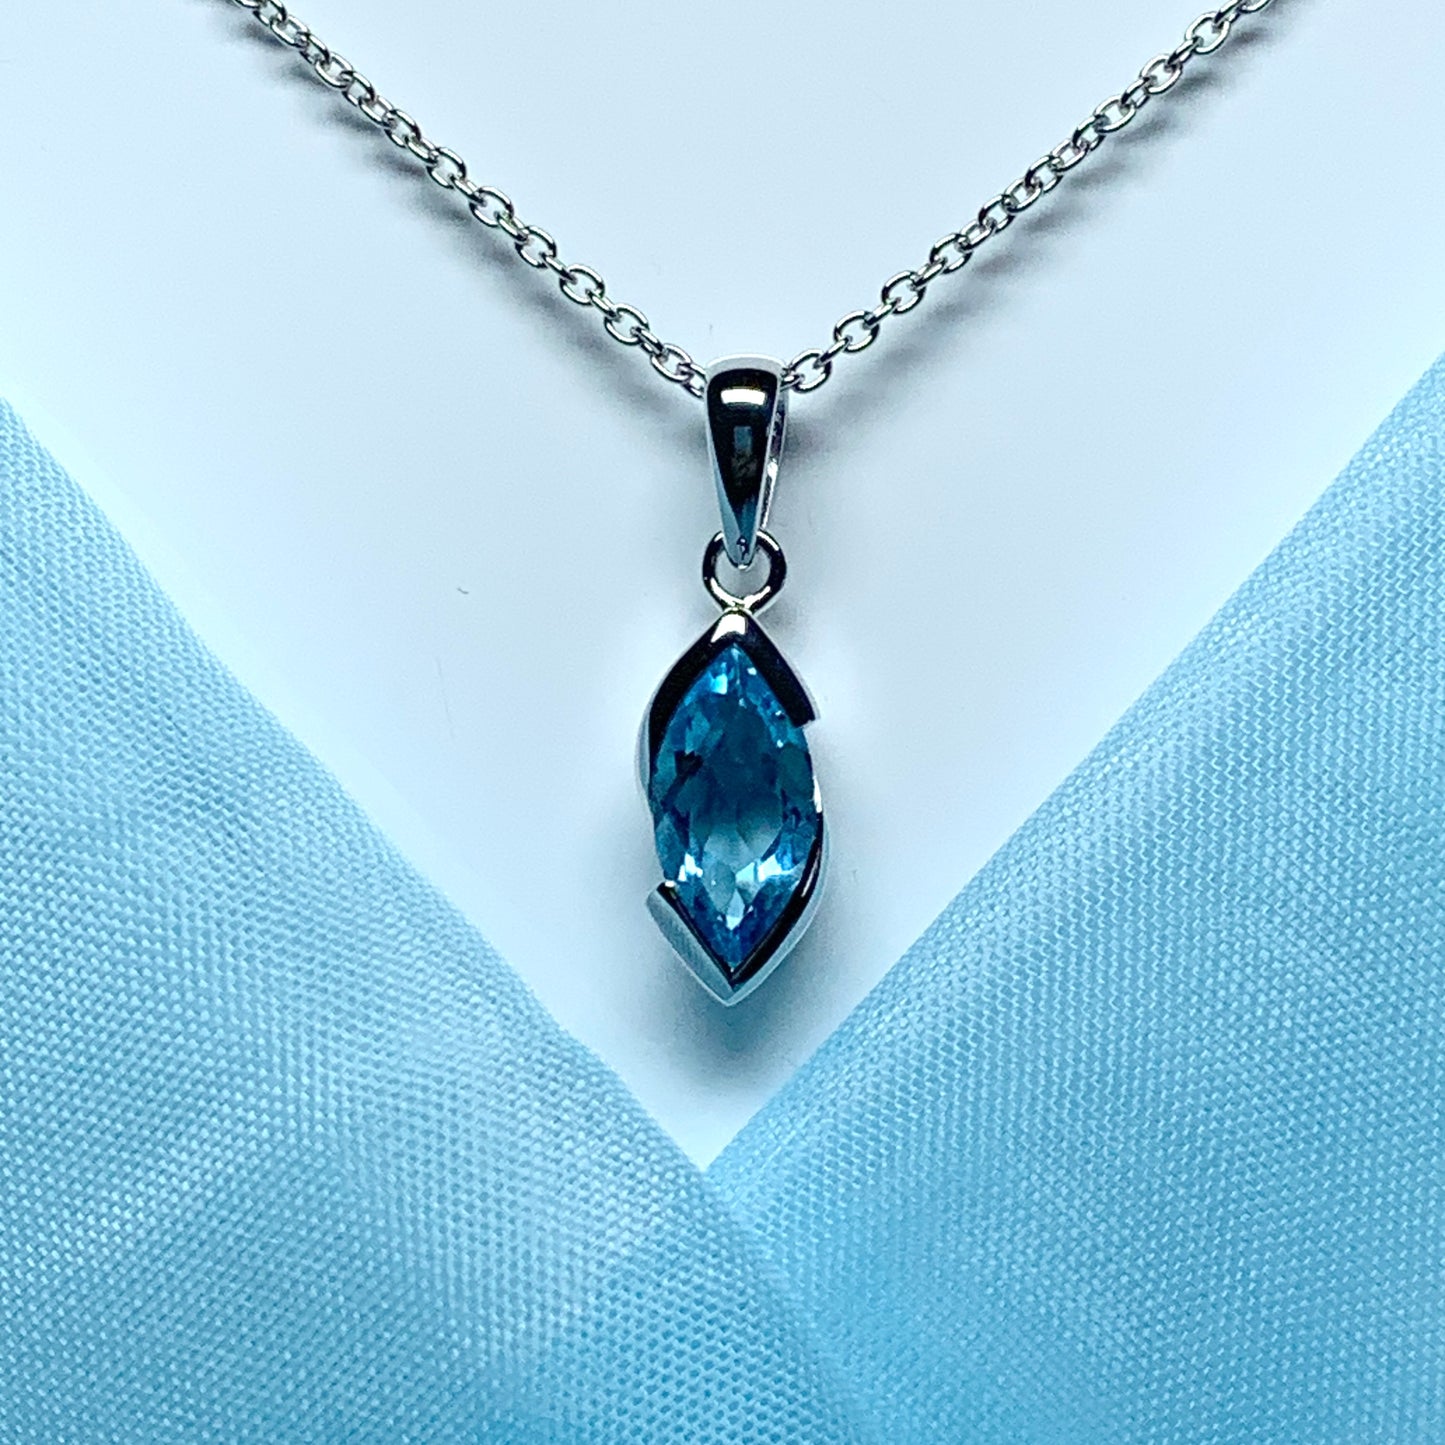 Real blue topaz necklace pendant marquise smooth rubbed over setting